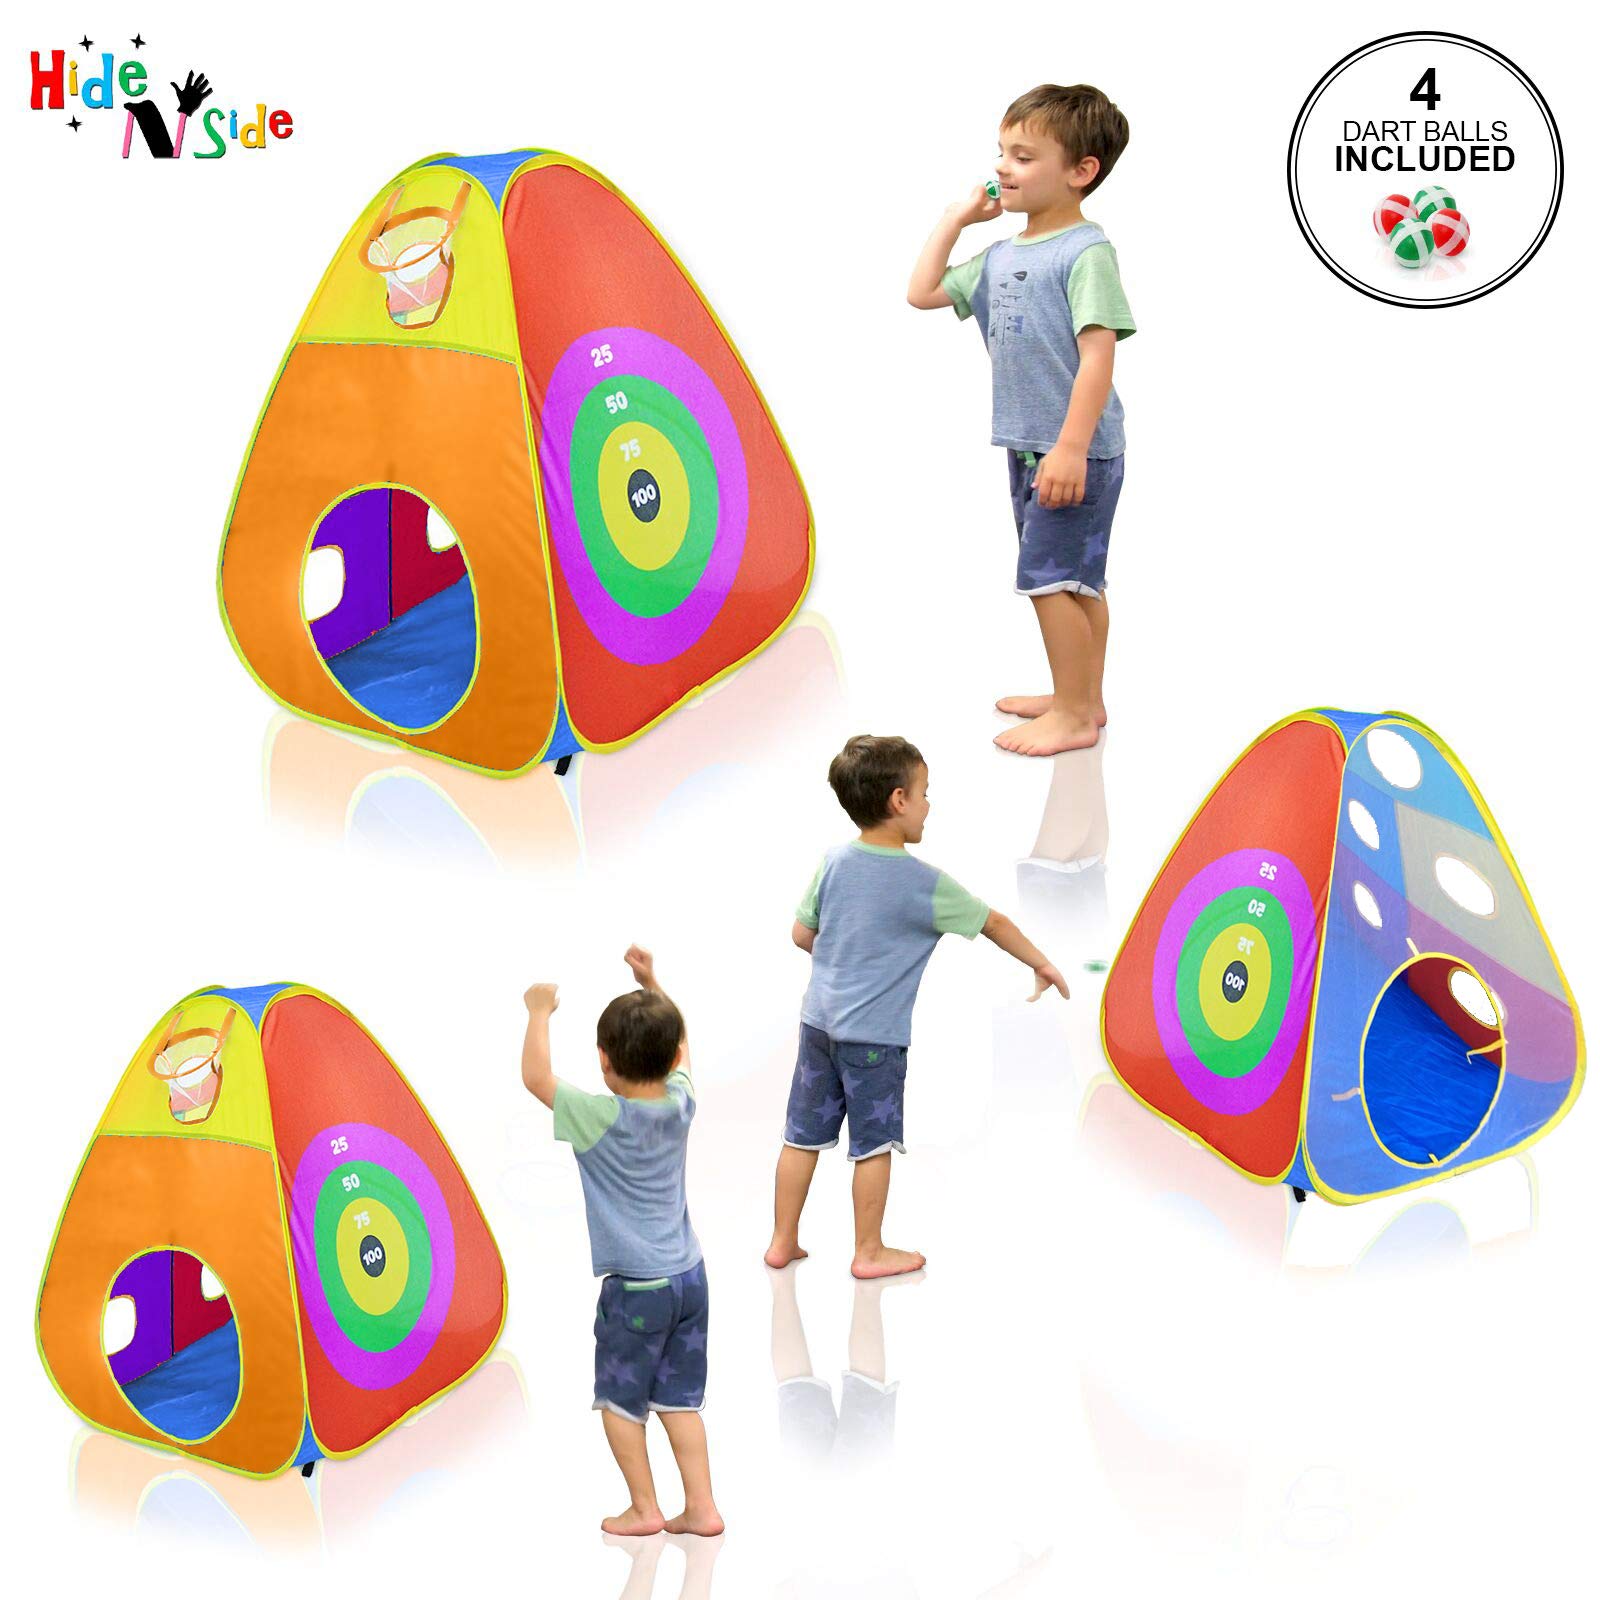 Gift for Toddler Boys & Girls, Ball Pit, Play Tent and Tunnels for Kids, Best Birthday Gift for 1 2 3 4 5 Year Old Pop Up Baby Play Toy, Target Game w/ 4 Darts Indoor & Outdoor